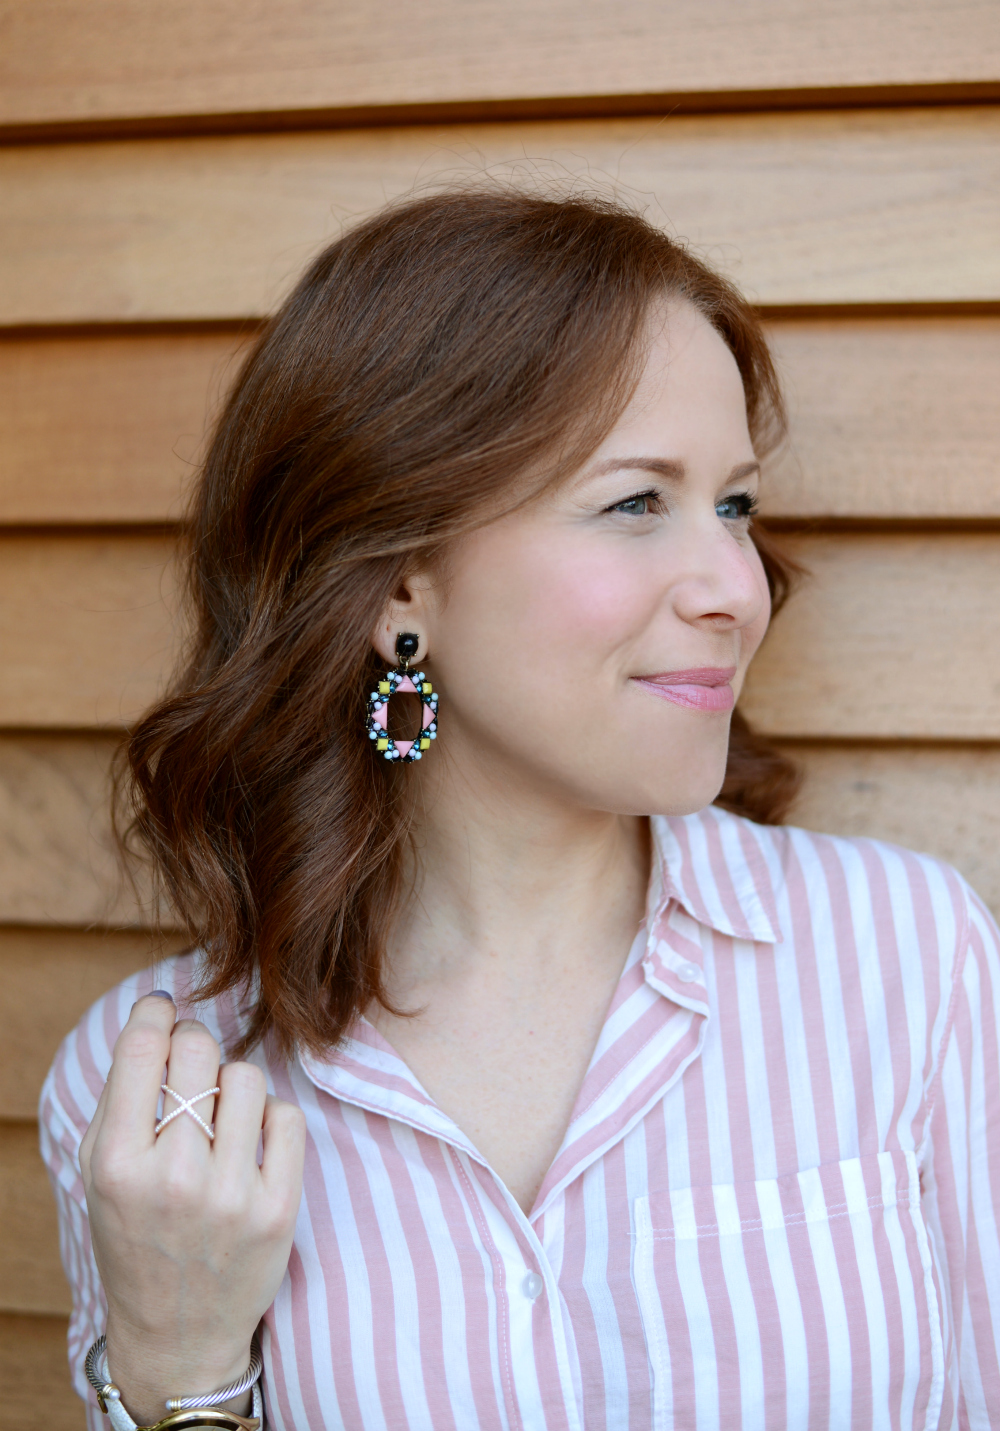 How to wear statement earrings for everyday